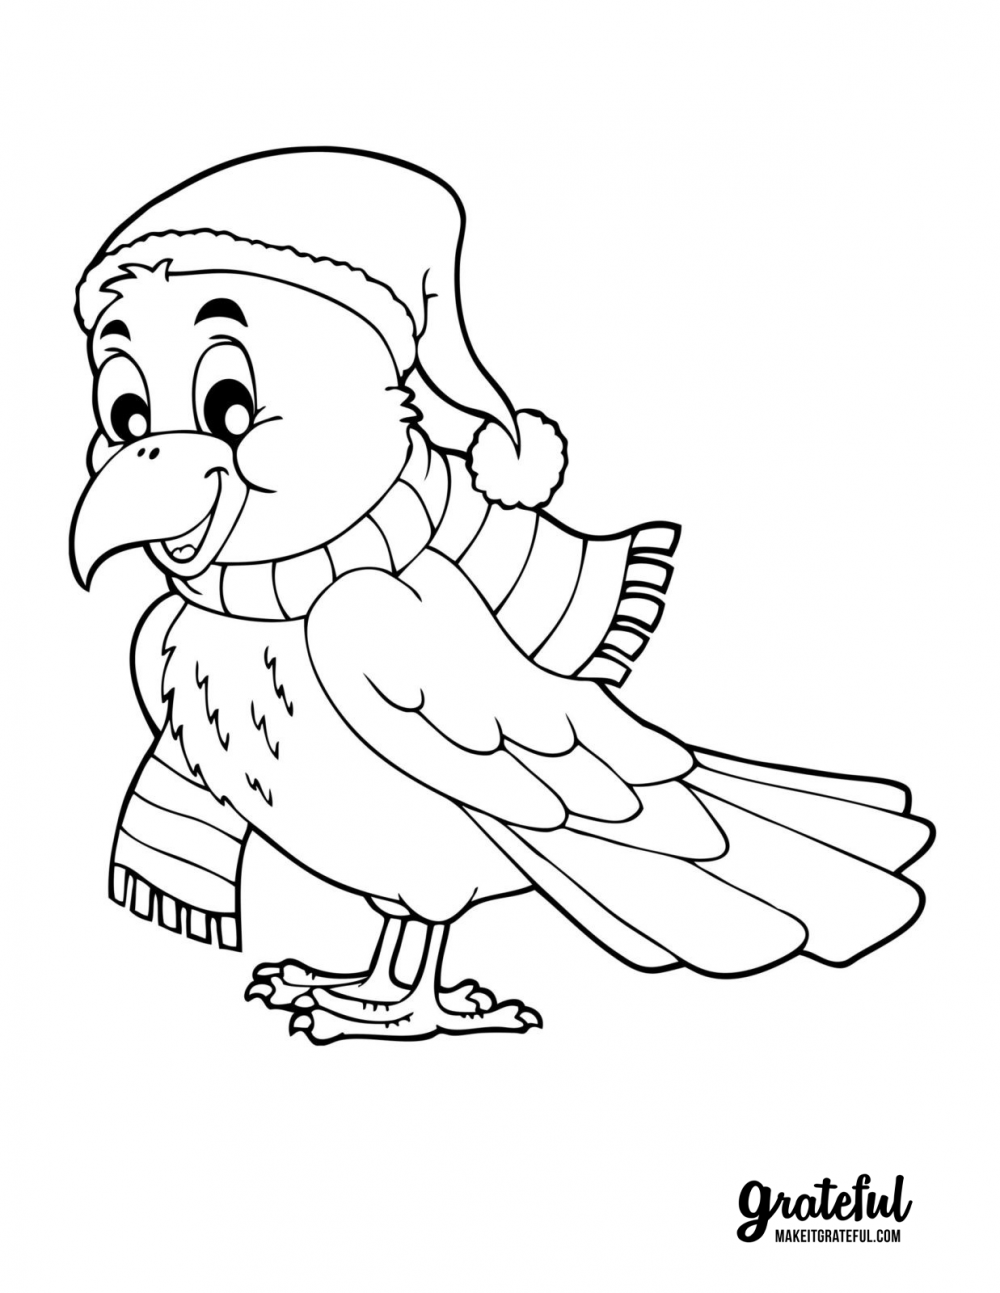 Cozy bird in autumn - Thanksgiving coloring pages